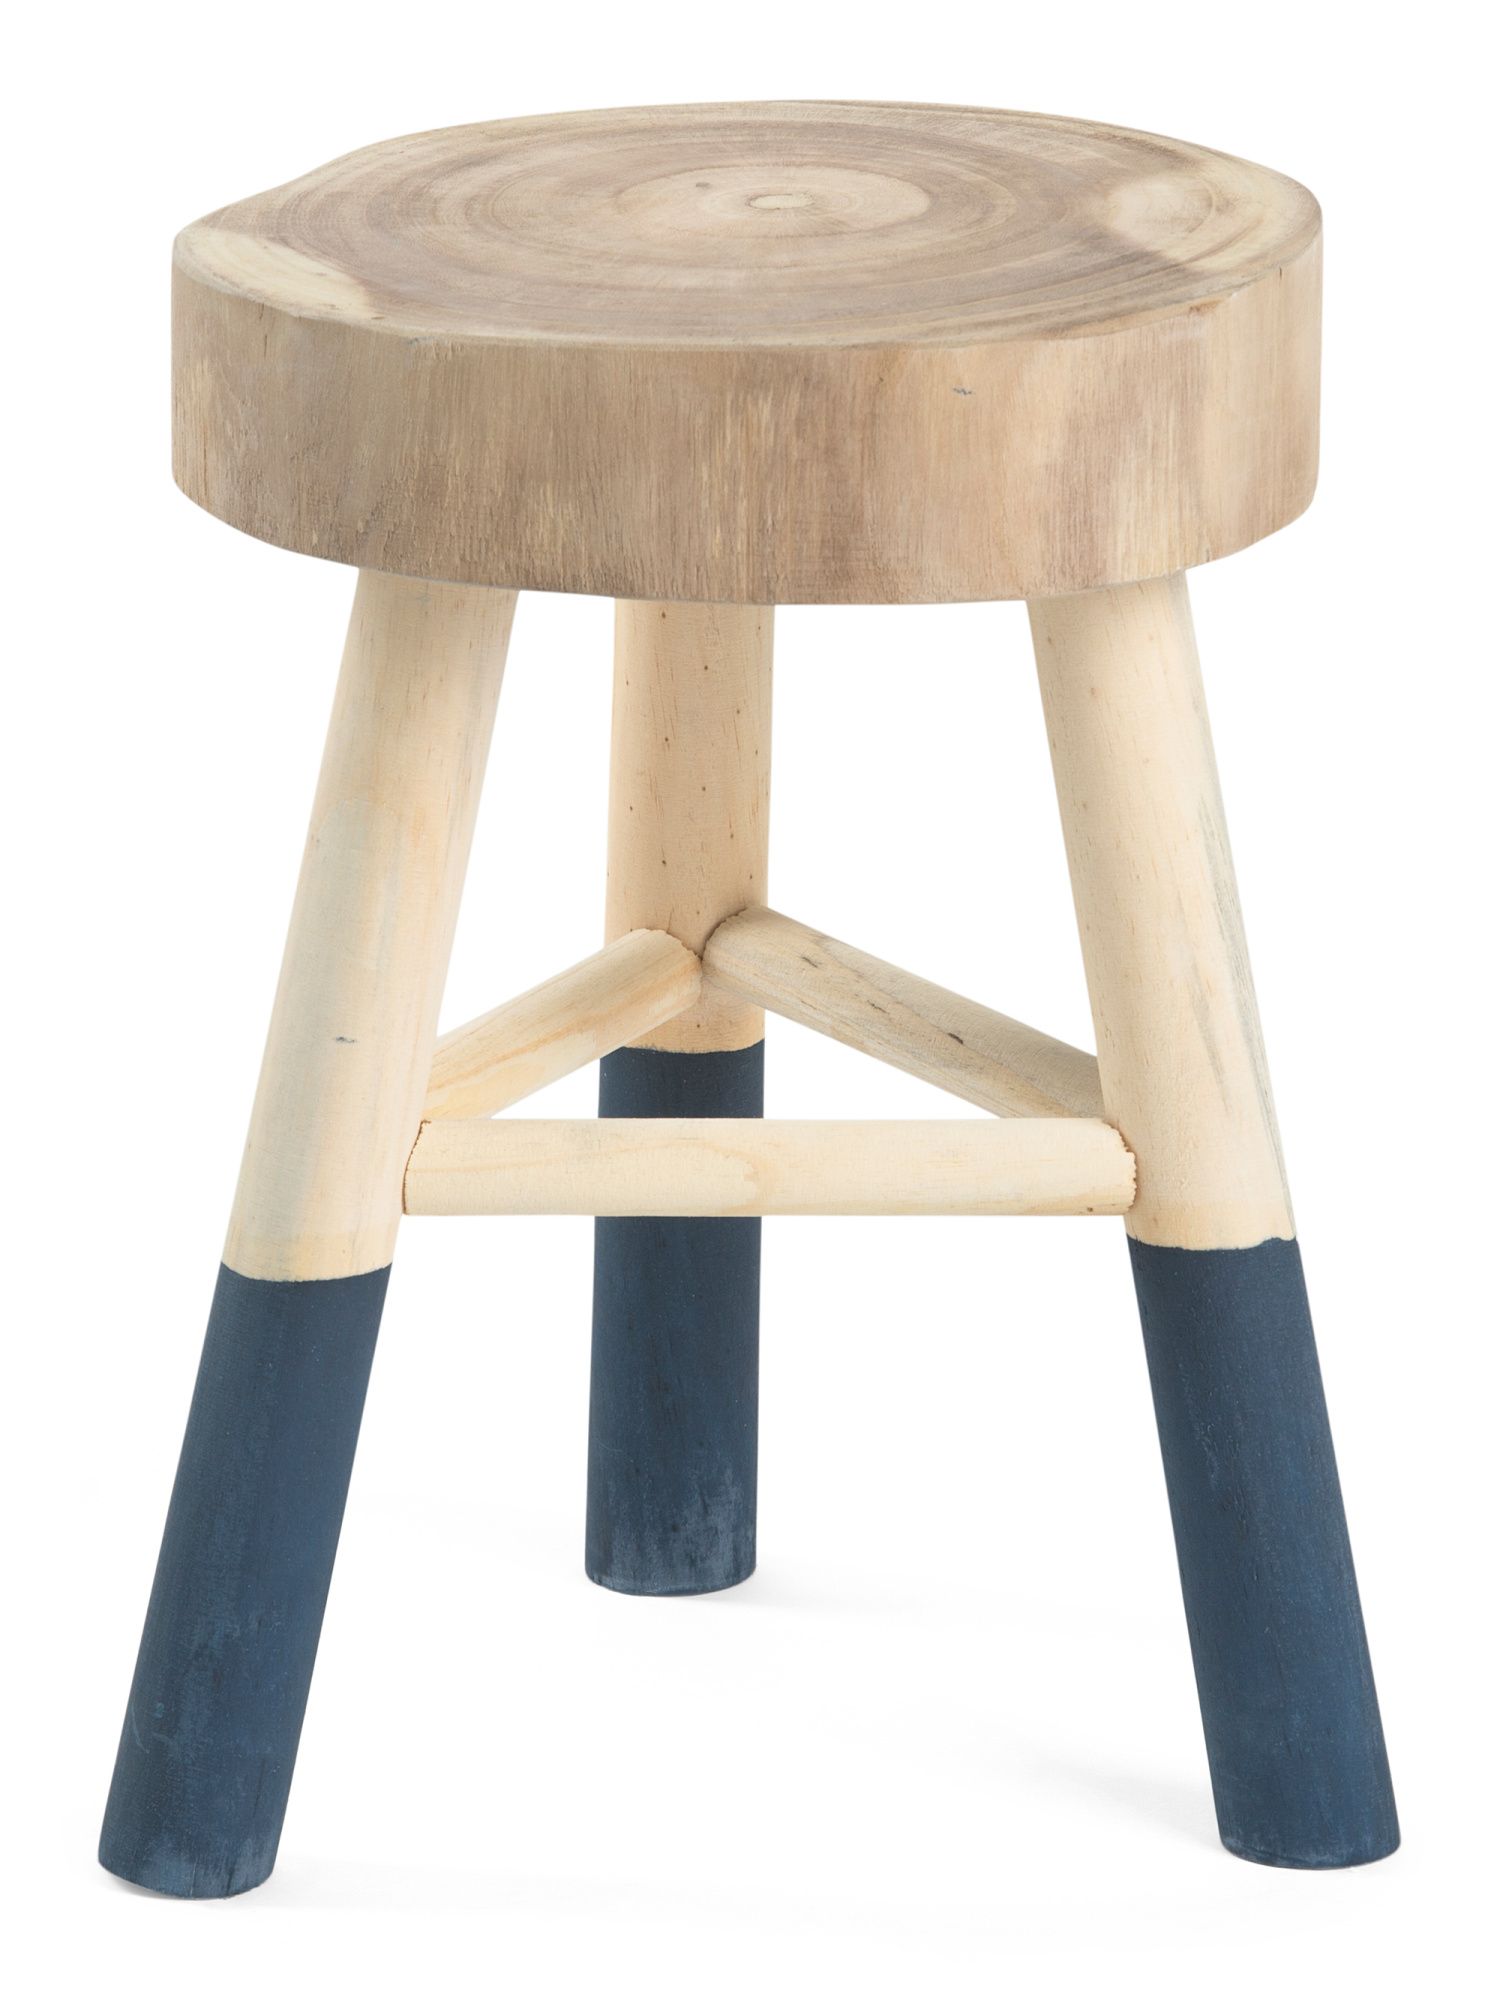 18in Wooden Stool With Dipped Legs | Pillows & Decor | Marshalls | Marshalls